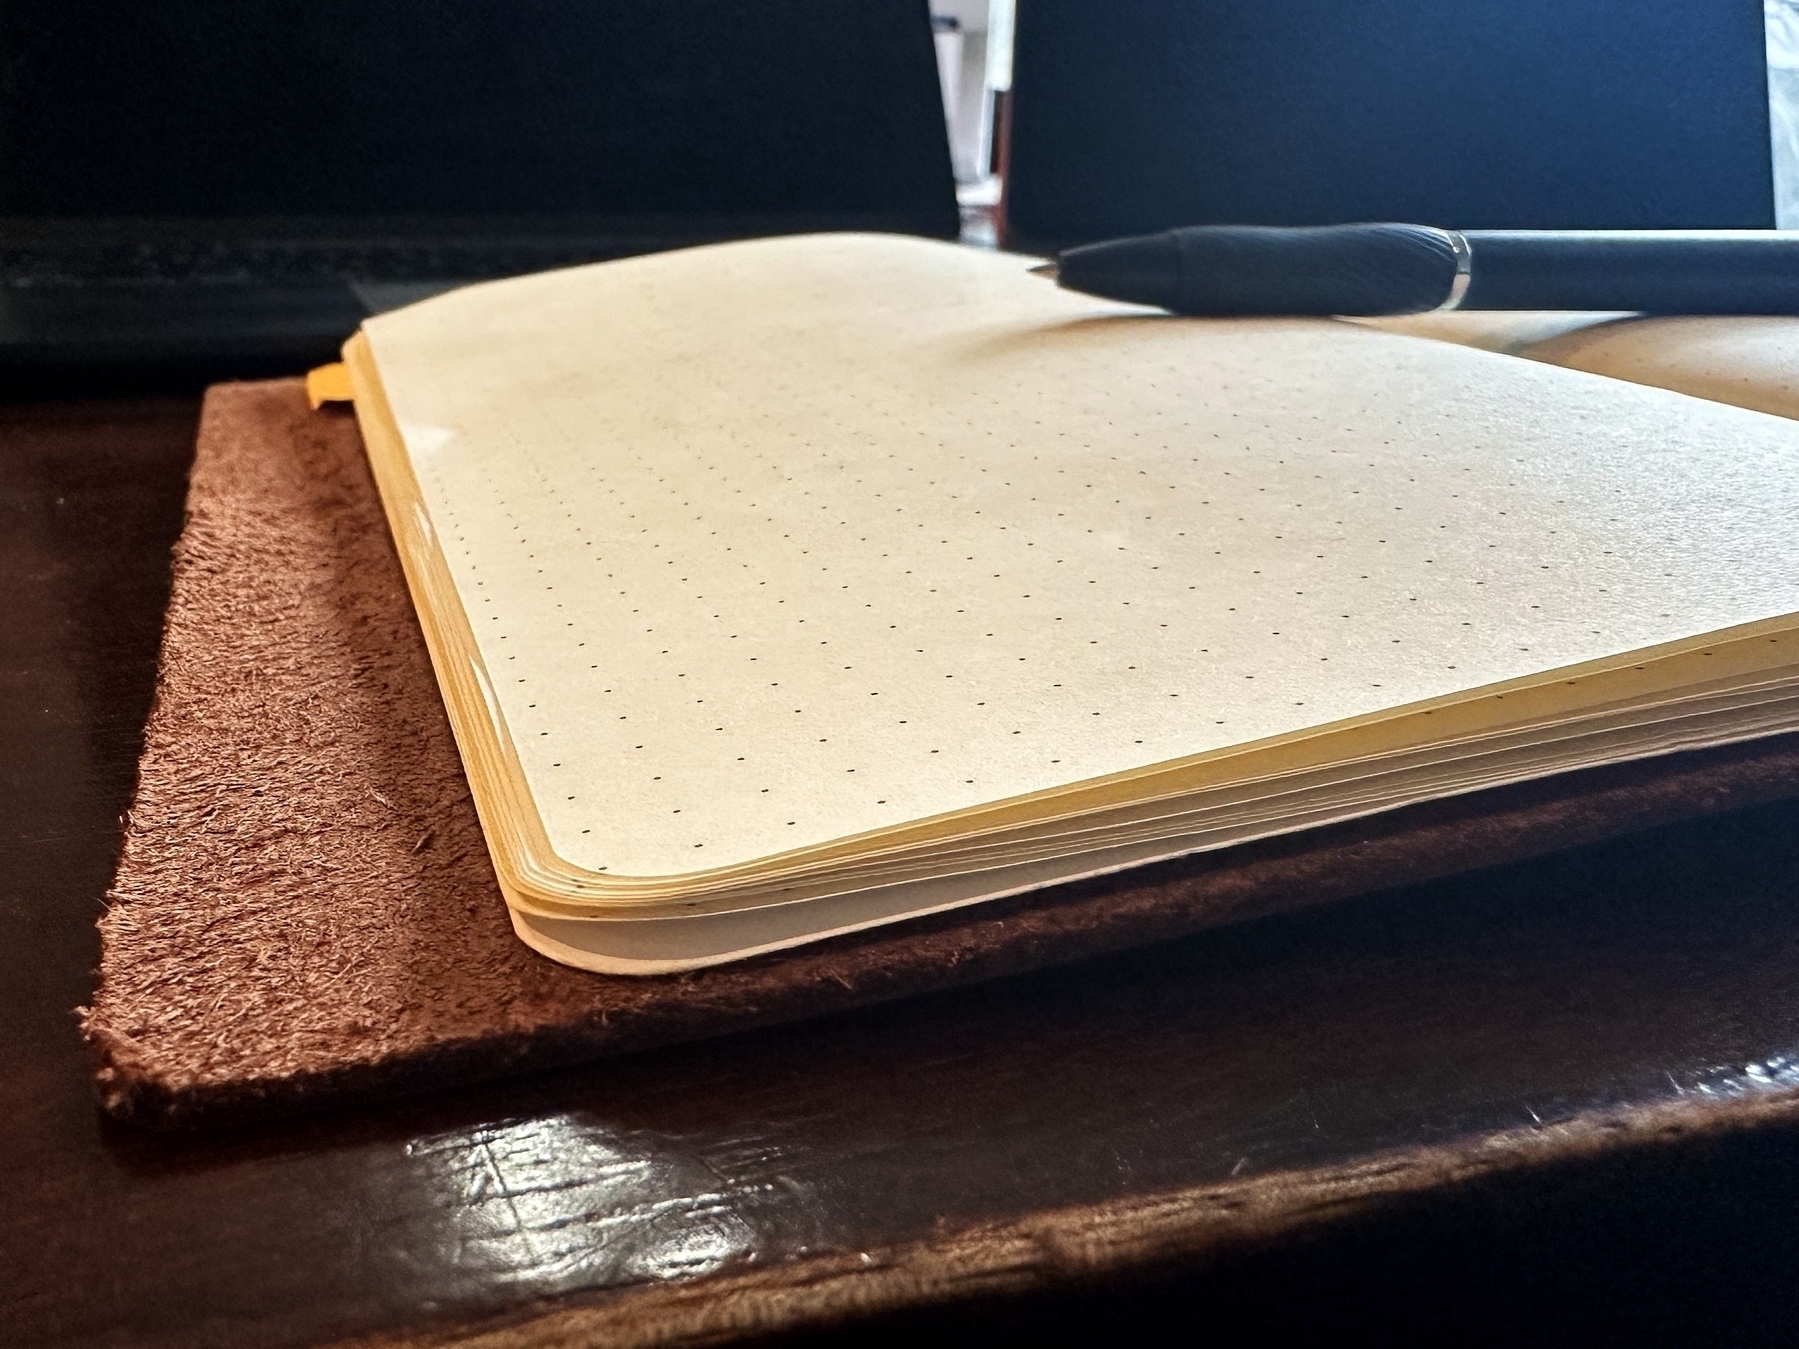 An open dot-grid notebook and pen rest on a leather surface next to a laptop, suggesting a work or study setting.